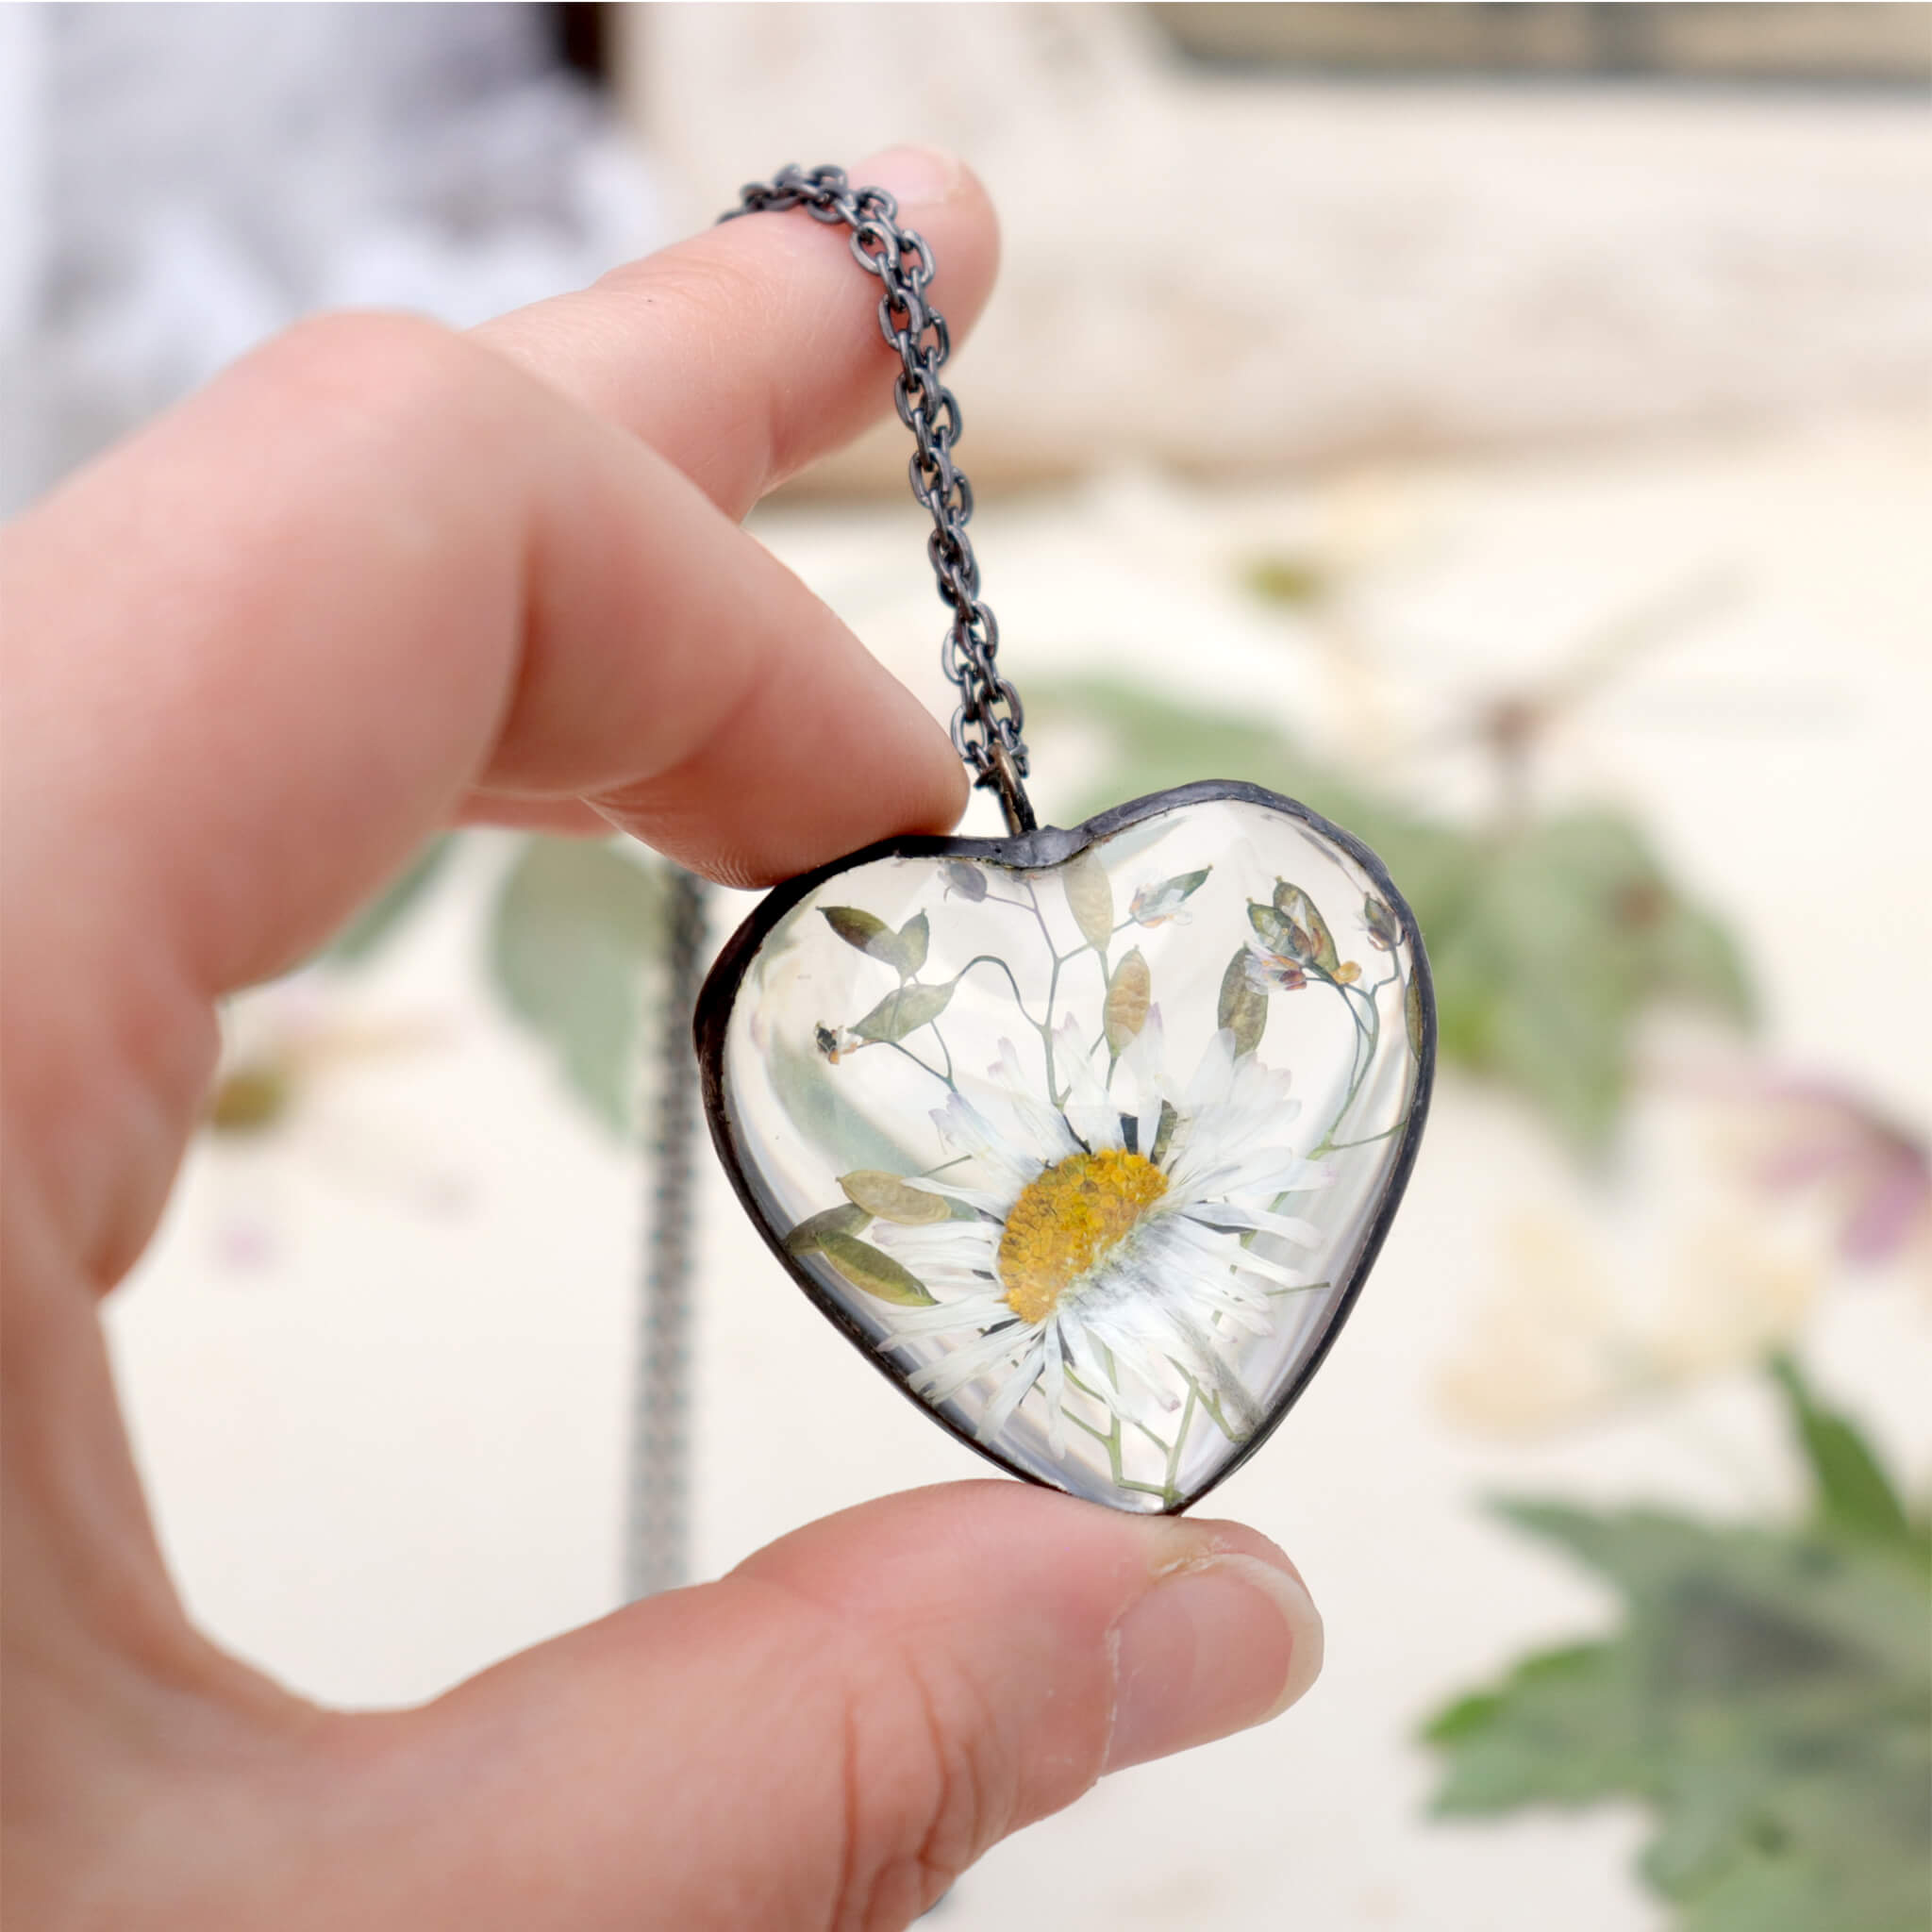 Hand holding heart shaped glass soldered necklace with pressed daisy inside on a pale background